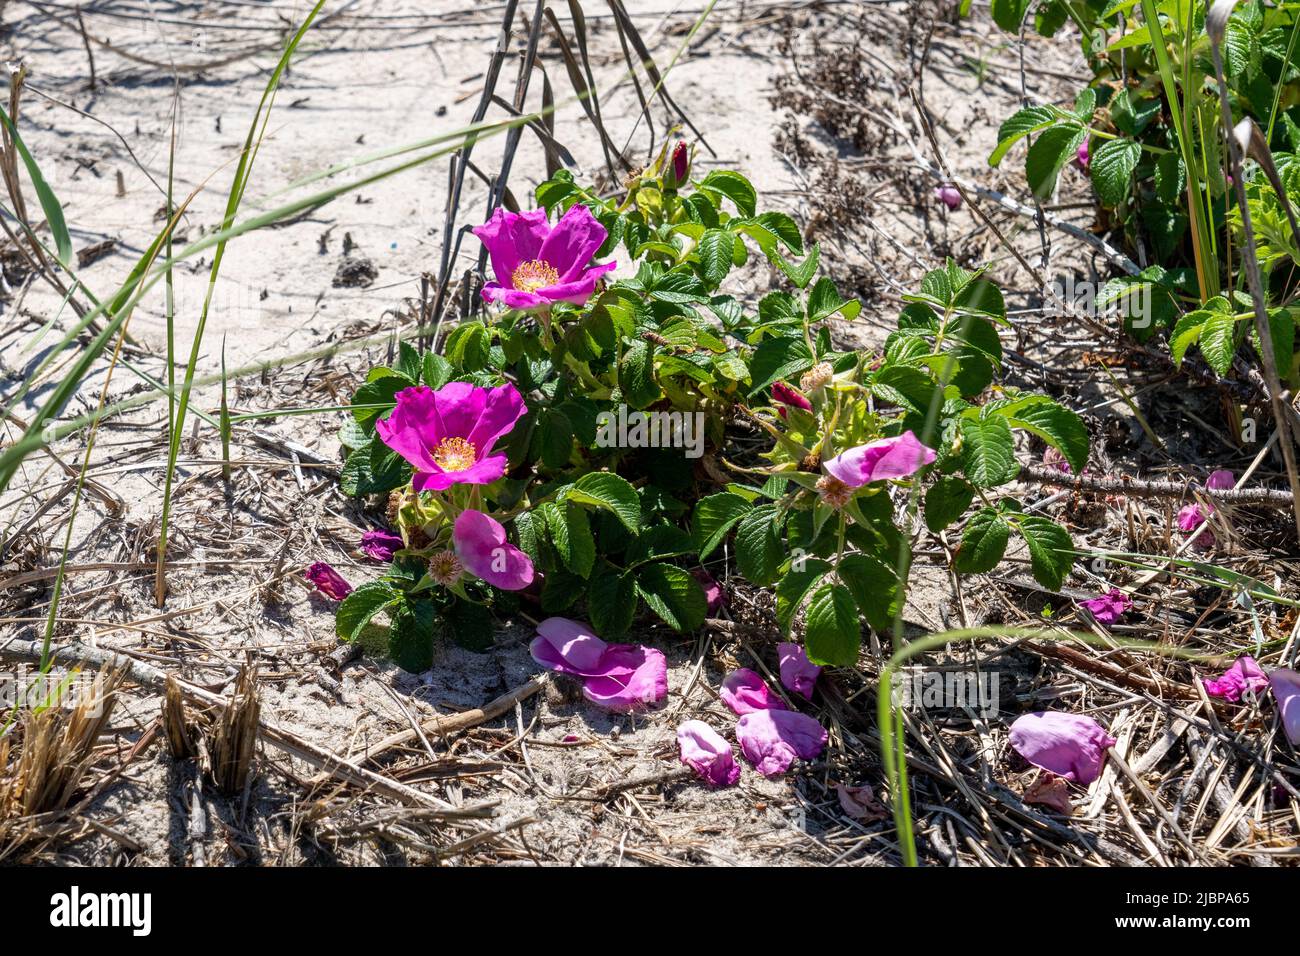 Beach rose or Rosa rugosa on a dune at the beach in Sea Isle City, New Jersey Stock Photo